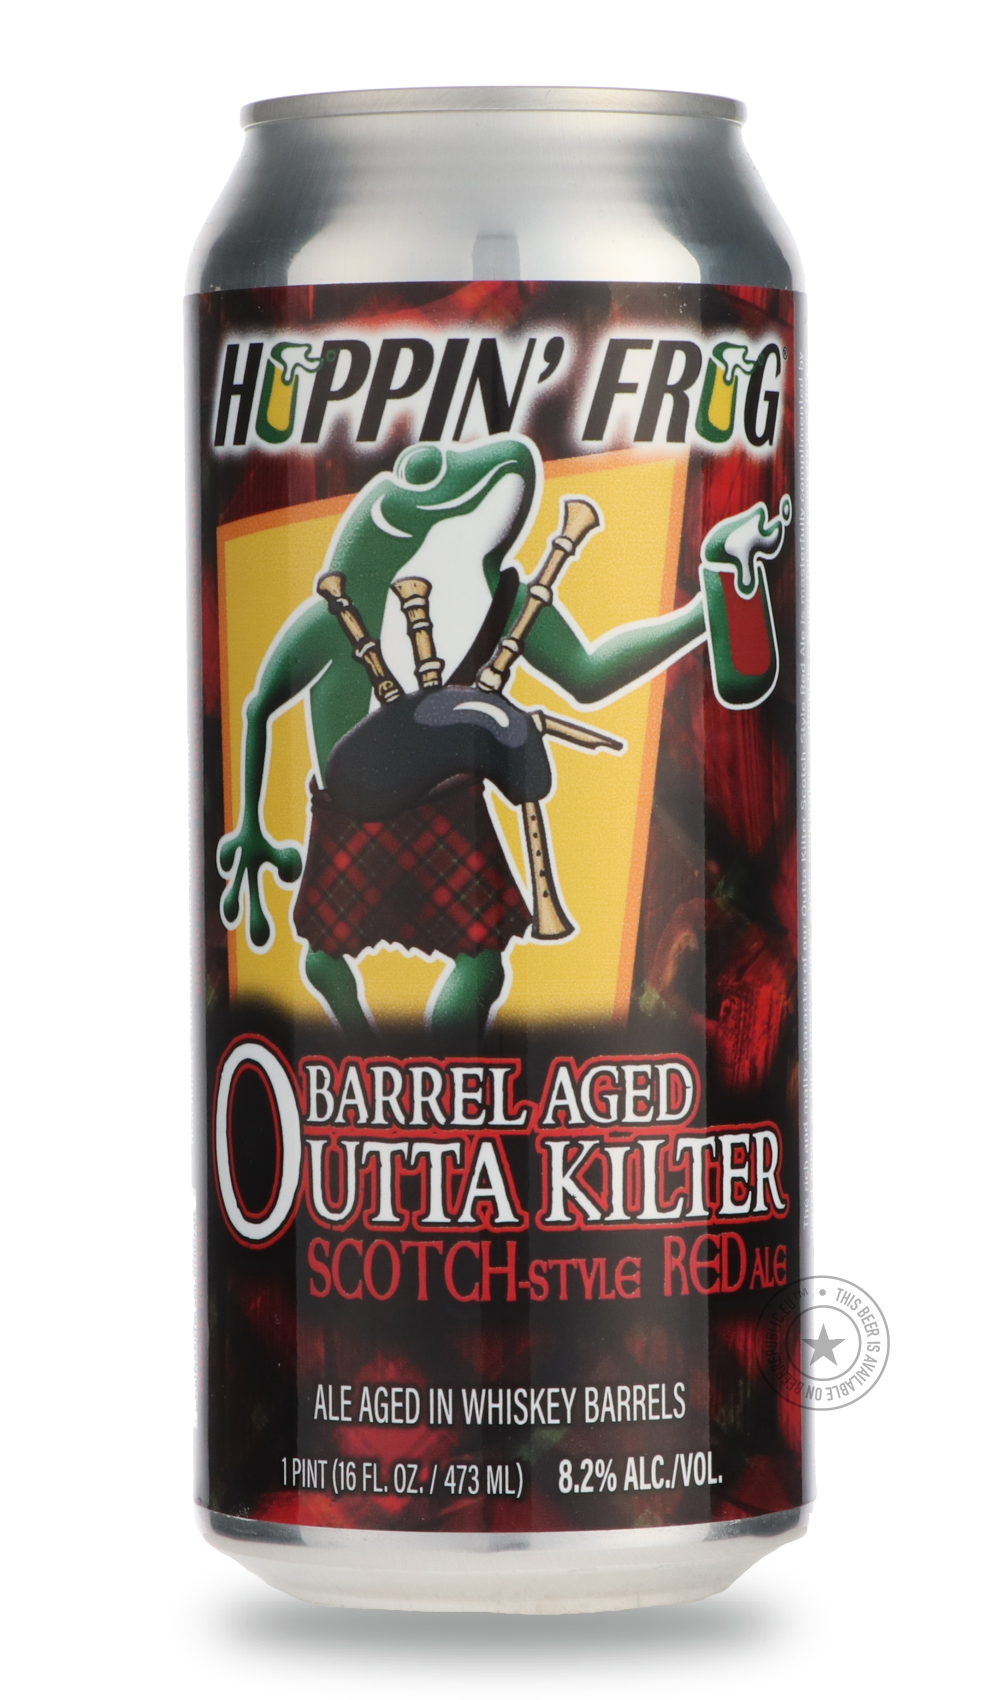 -Hoppin' Frog- Barrel Aged Outta Kilter Scotch-Style Red Ale-Brown & Dark- Only @ Beer Republic - The best online beer store for American & Canadian craft beer - Buy beer online from the USA and Canada - Bier online kopen - Amerikaans bier kopen - Craft beer store - Craft beer kopen - Amerikanisch bier kaufen - Bier online kaufen - Acheter biere online - IPA - Stout - Porter - New England IPA - Hazy IPA - Imperial Stout - Barrel Aged - Barrel Aged Imperial Stout - Brown - Dark beer - Blond - Blonde - Pilsne